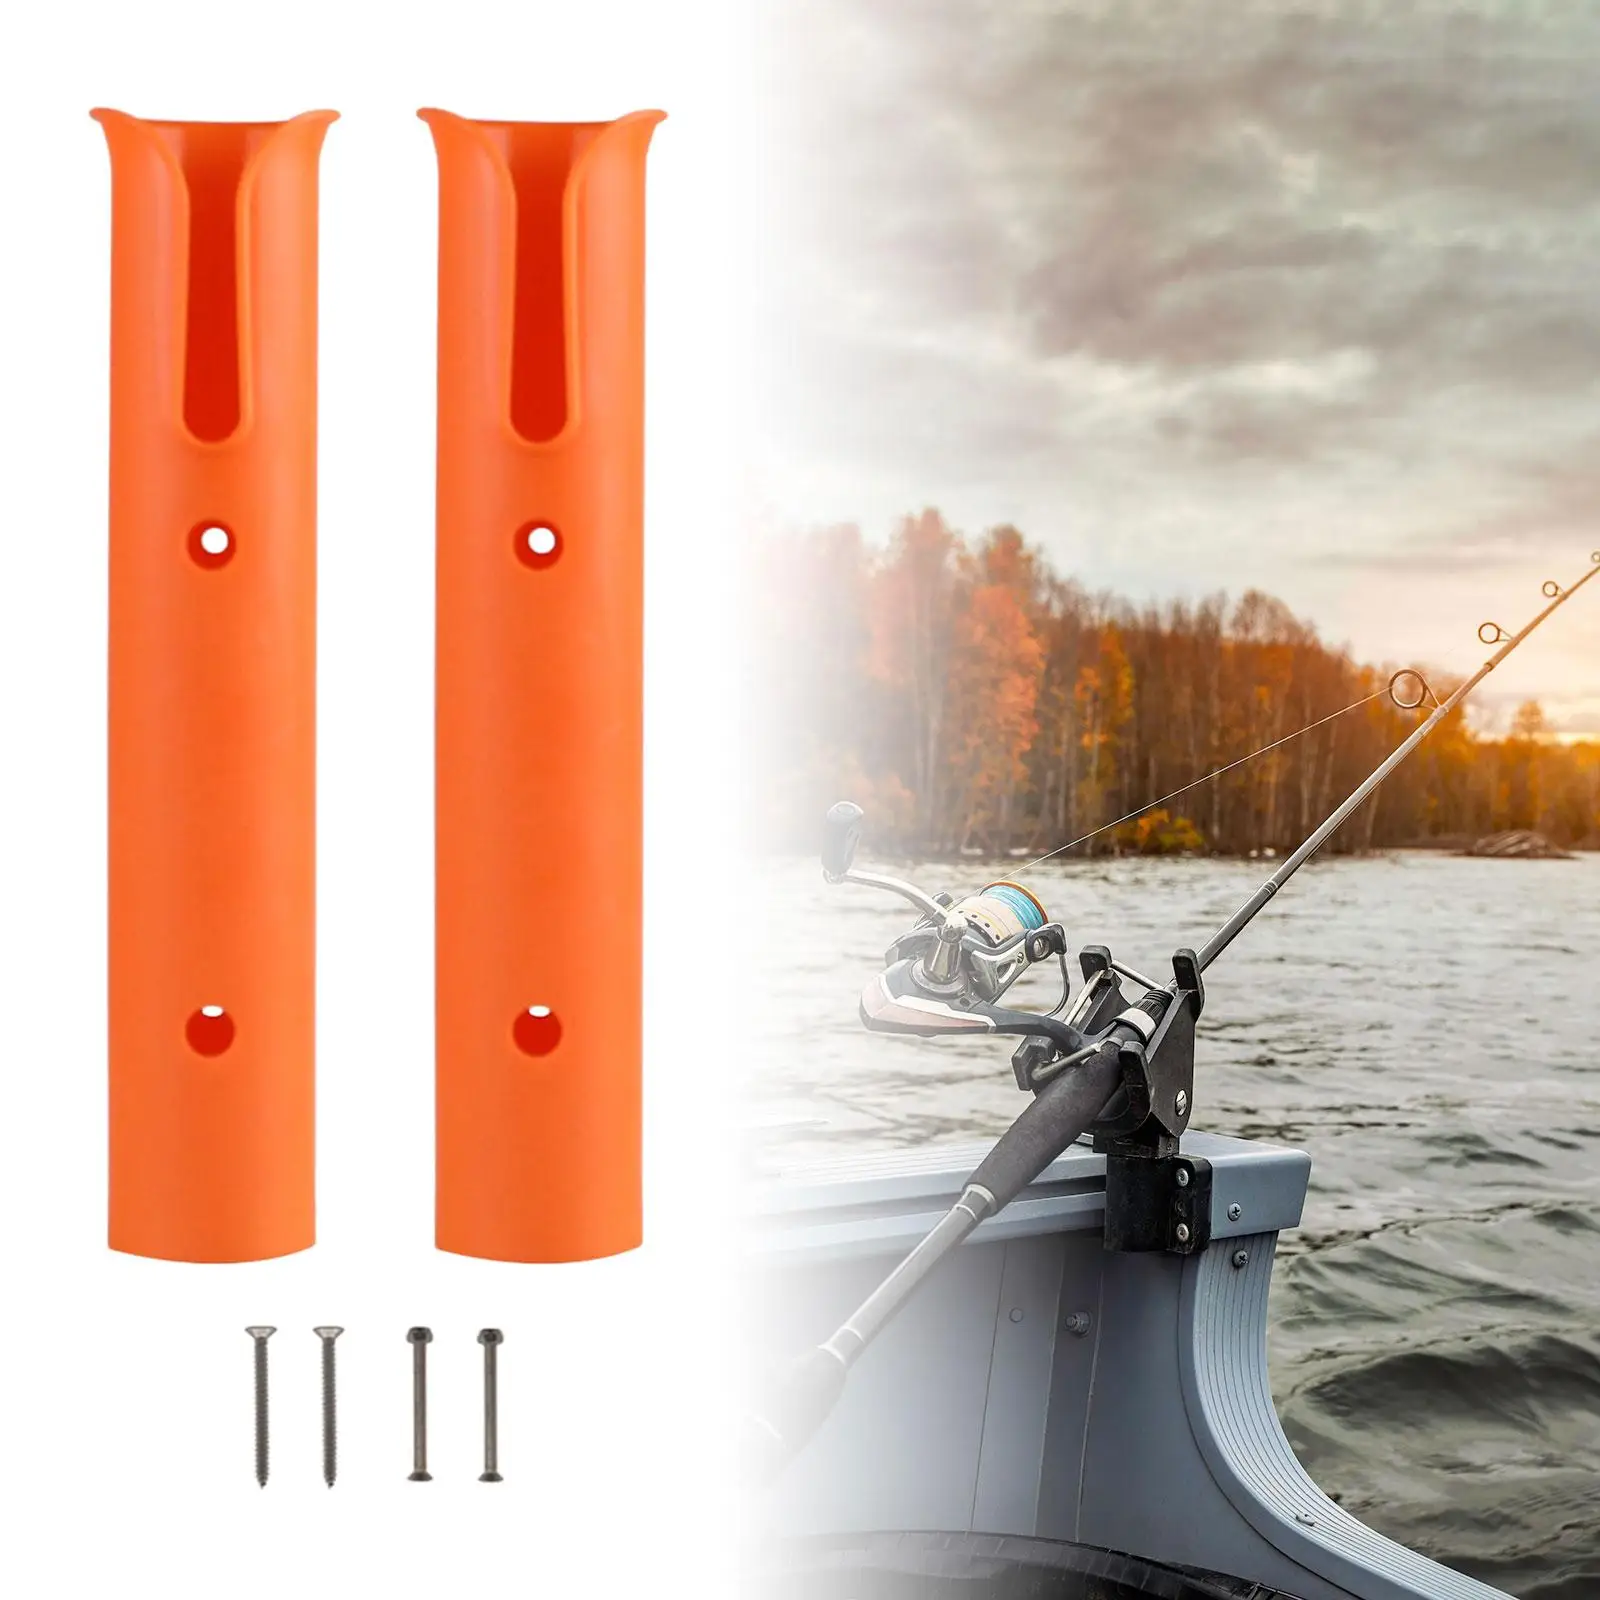 2 Pieces Fishing Rod Holder Tube Rod Portable Durable Hanger Organizer Fishing Rod Rack for Boat Trailer Kayak Cabin Accessories